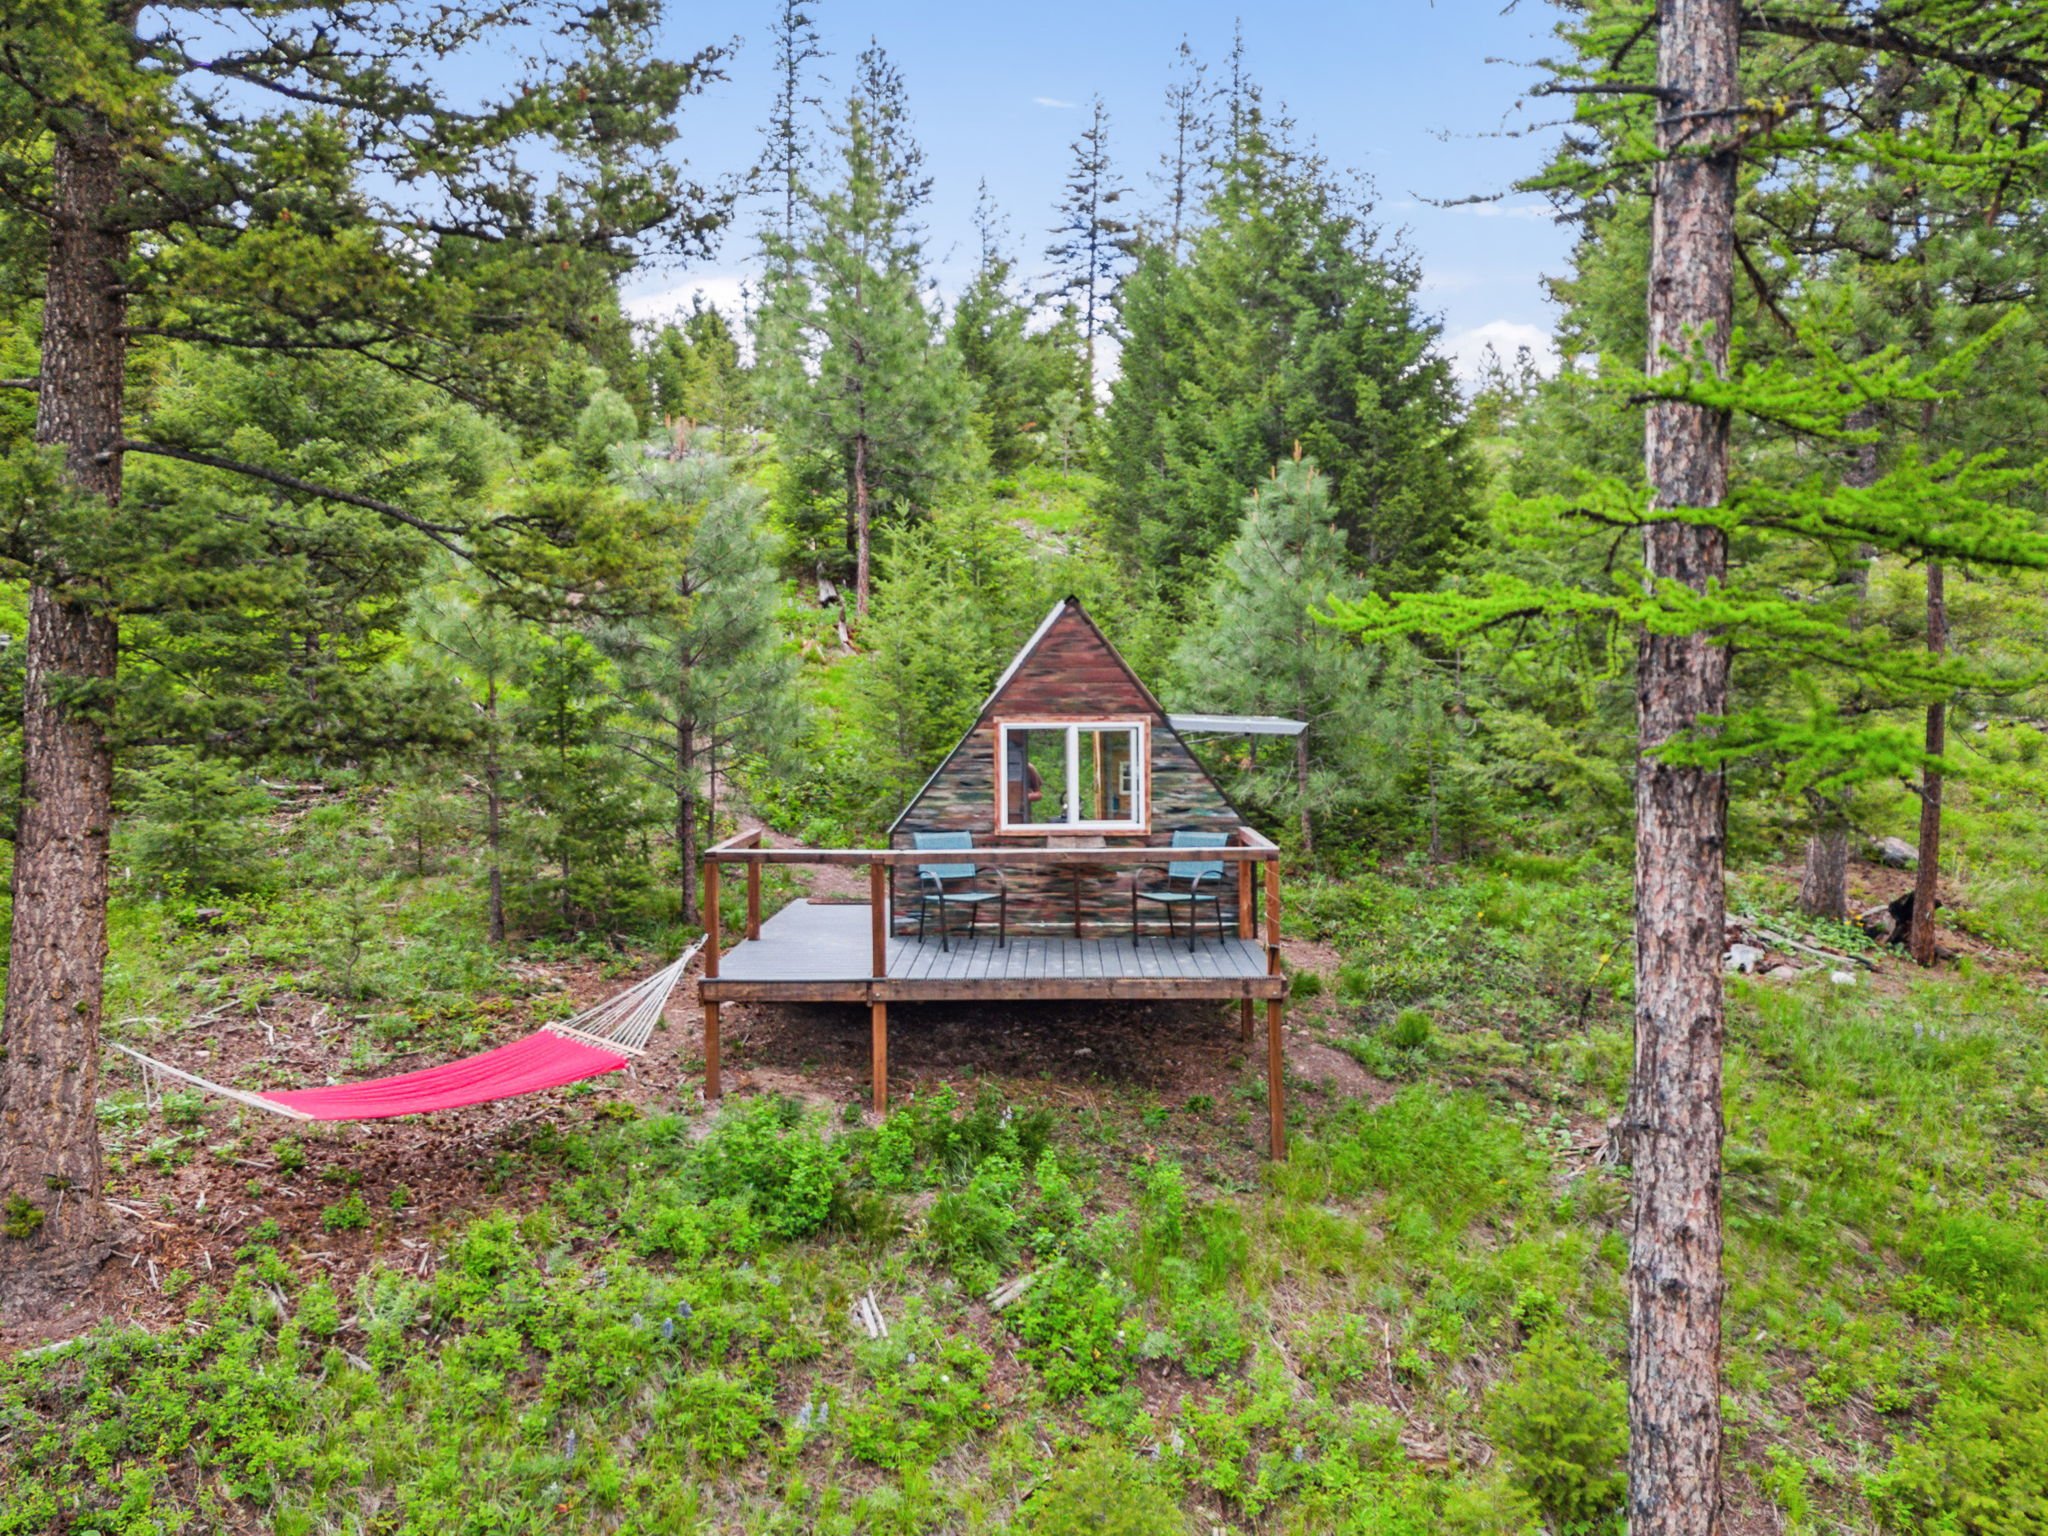 The Blind Cabin at The Hohnstead Glamping Cabins Resort in Bonner Montana